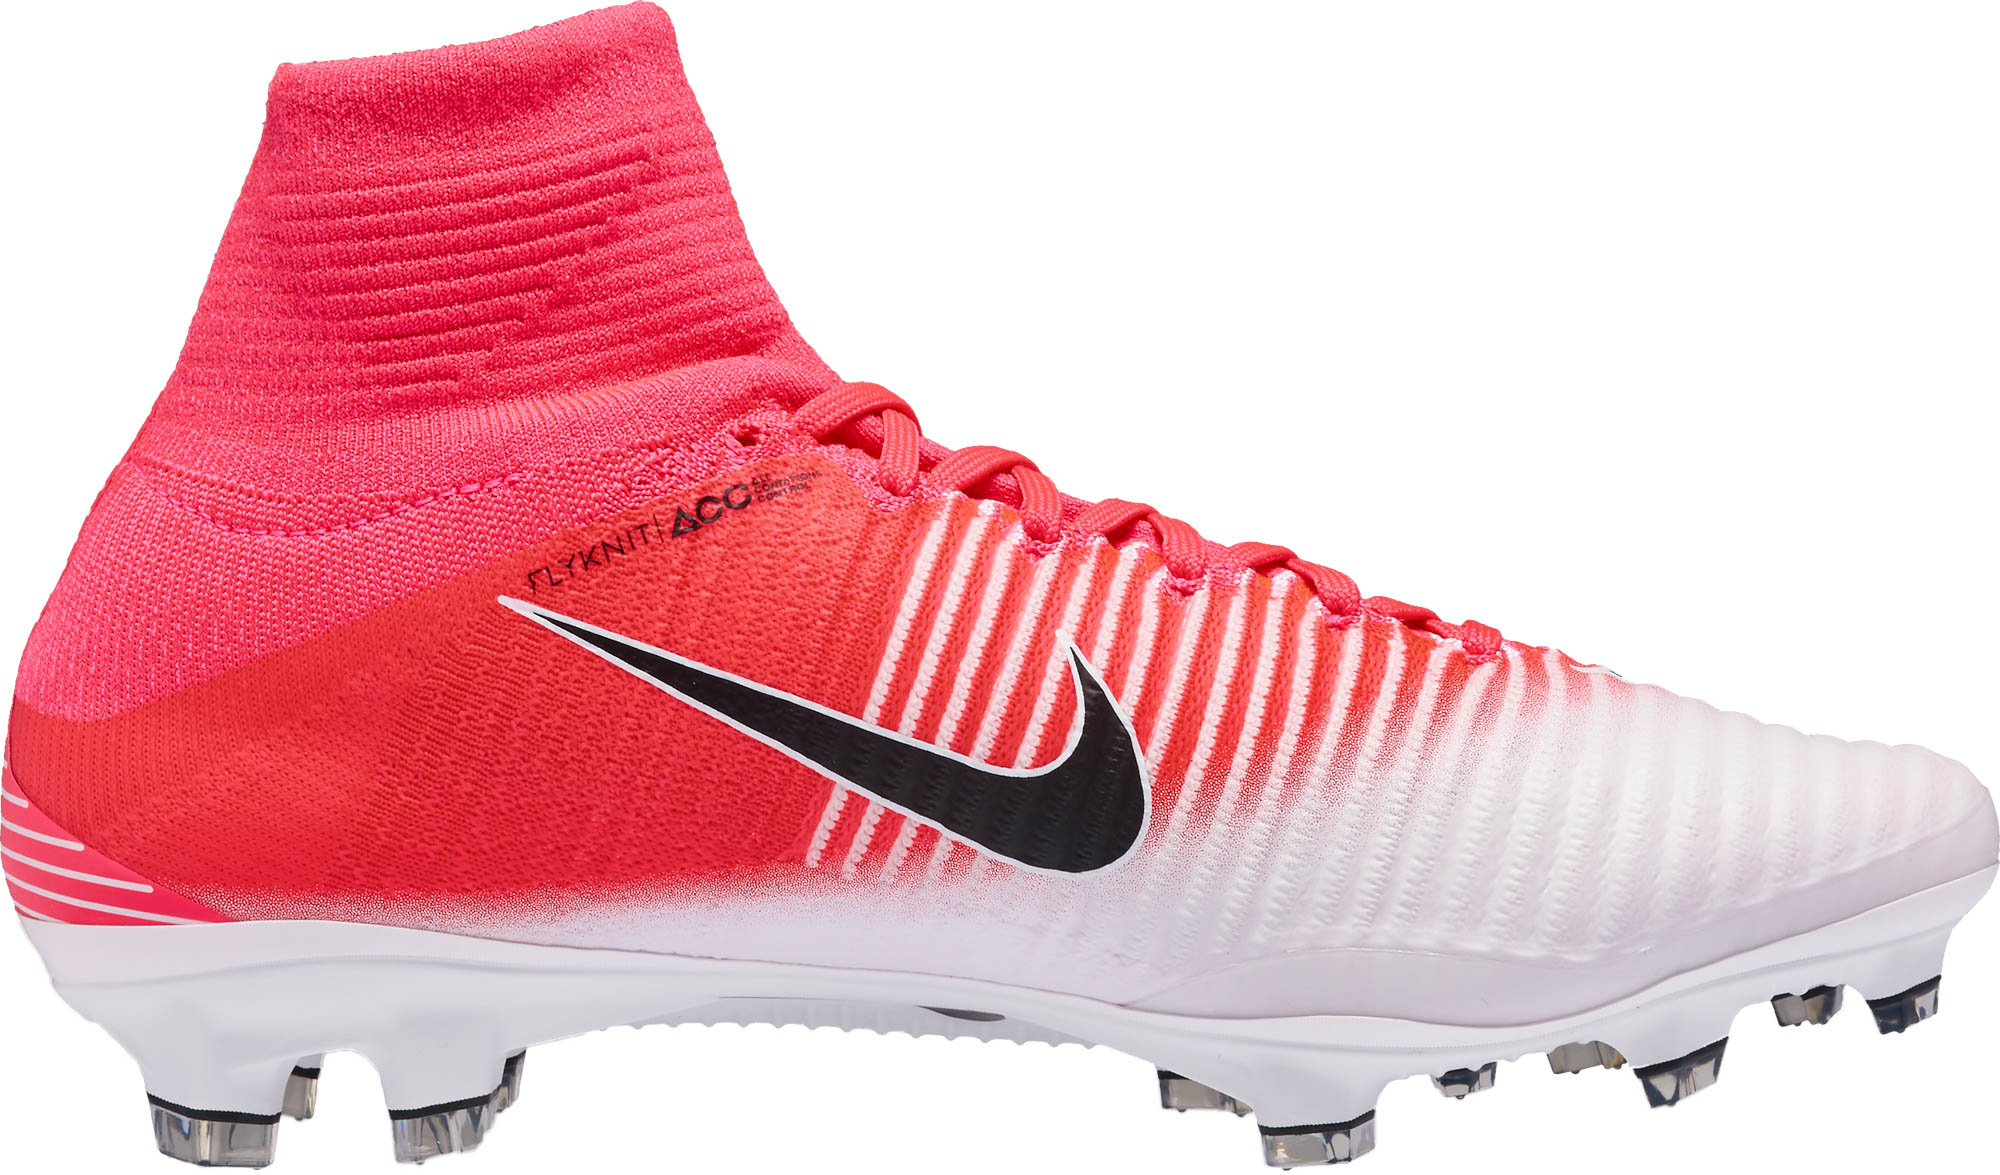 pink and black mercurial superfly